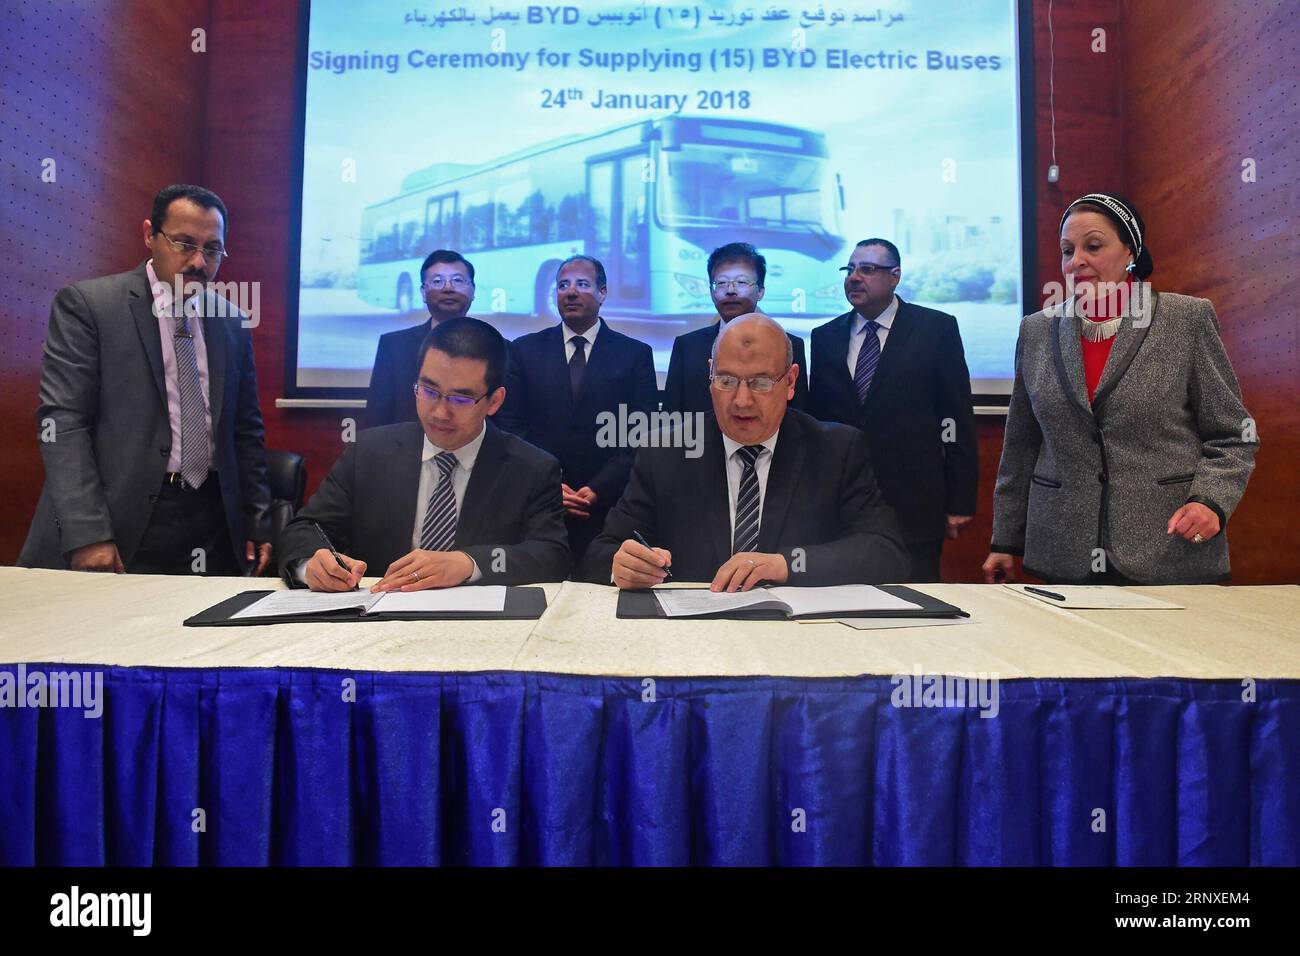 (180126) -- ALEXANDRIA, Jan. 26, 2018 -- Huang Zhixue (front, L), general manager with BYD s Middle East and Africa Auto Sales Division, signs an agreement in Alexandria, Egypt, Jan. 24, 2018. Chinese auto manufacturer BYD signed an agreement on Jan. 24 with Egyptian Passengers Transportation Authority to provide 15 electric buses for the Arab country s public transit fleet. ) (rh) EGYPT-ALEXANDRIA-ELECTRIC BUSES ZhaoxDingzhe PUBLICATIONxNOTxINxCHN Stock Photo